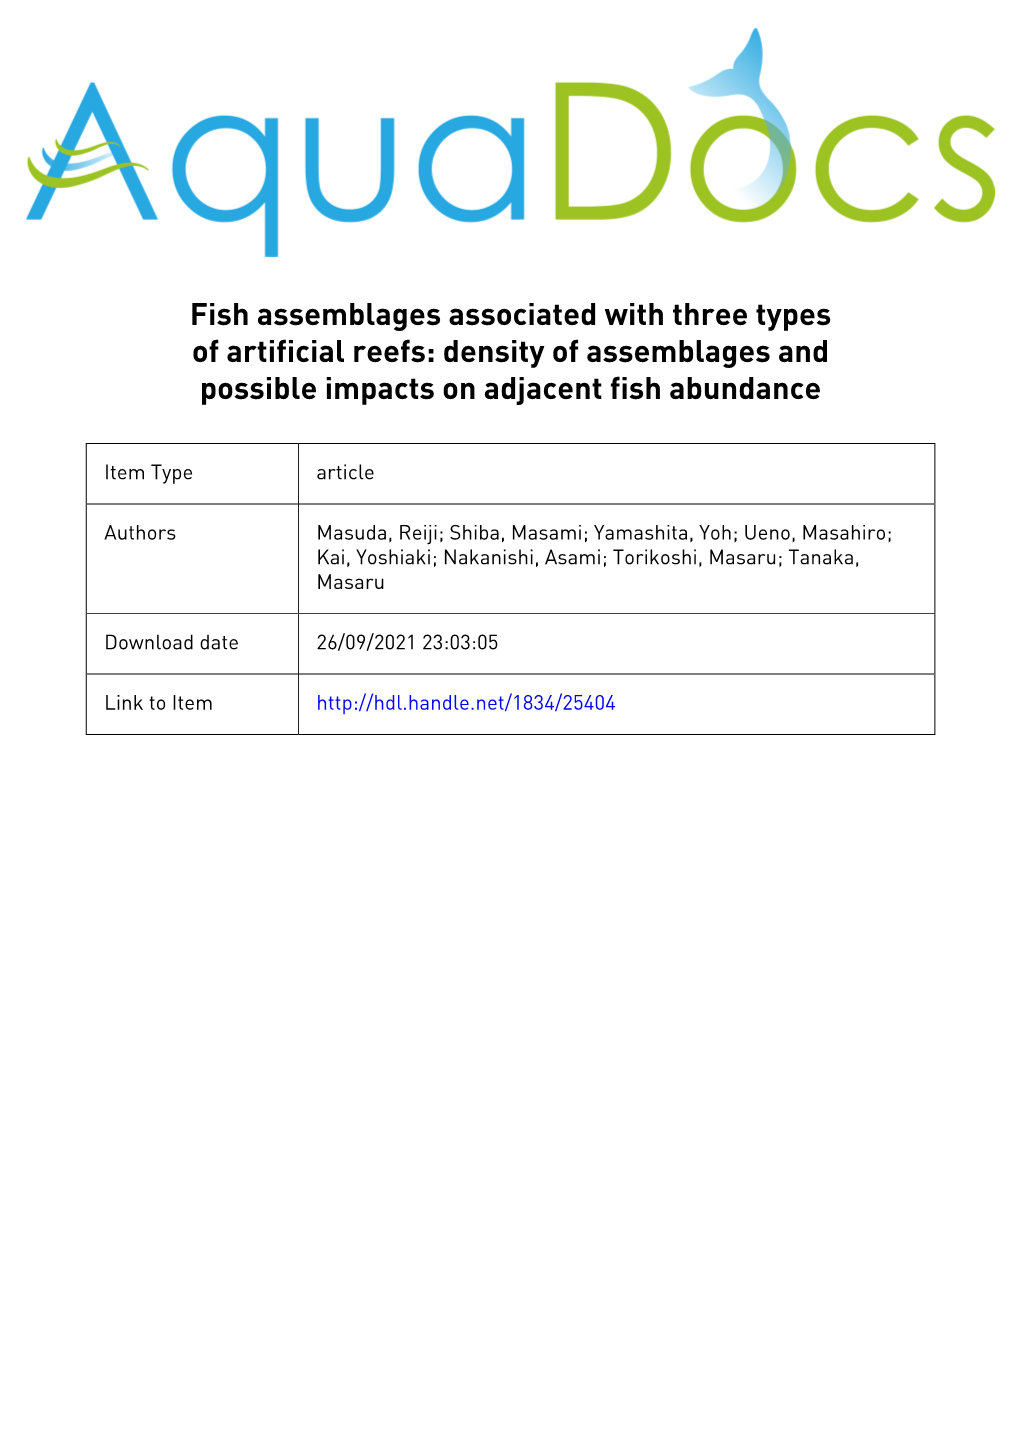 Fish Assemblages Associated with Three Types of Artificial Reefs: Density of Assemblages and Possible Impacts on Adjacent Fish Abundance